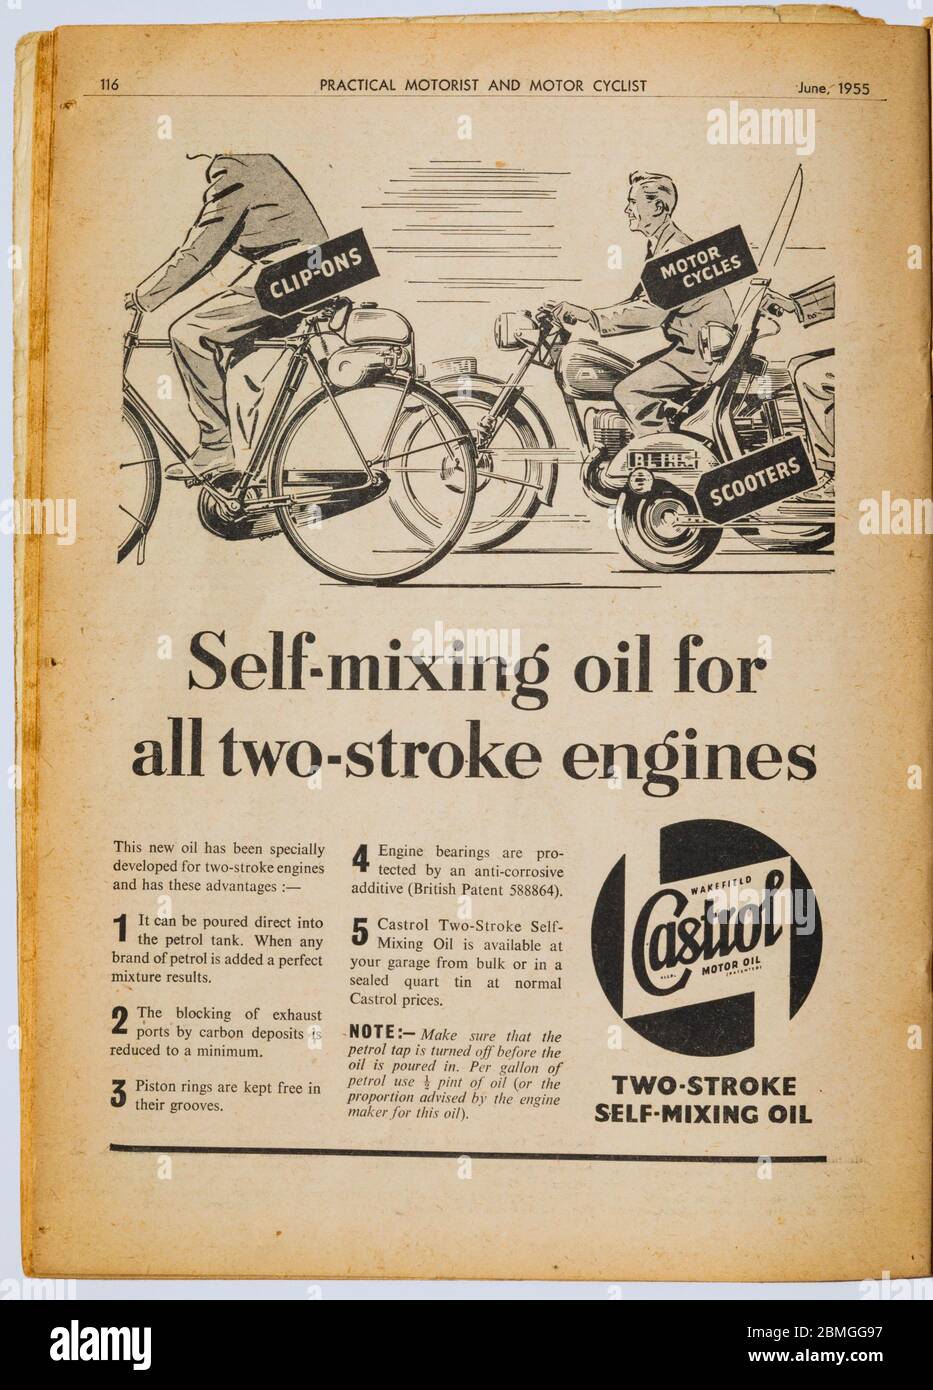 Black and white advert for Castrol two stroke self mixing oil in the June 1955 issue of Practical Motorist and Motor Cyclist magazine Stock Photo